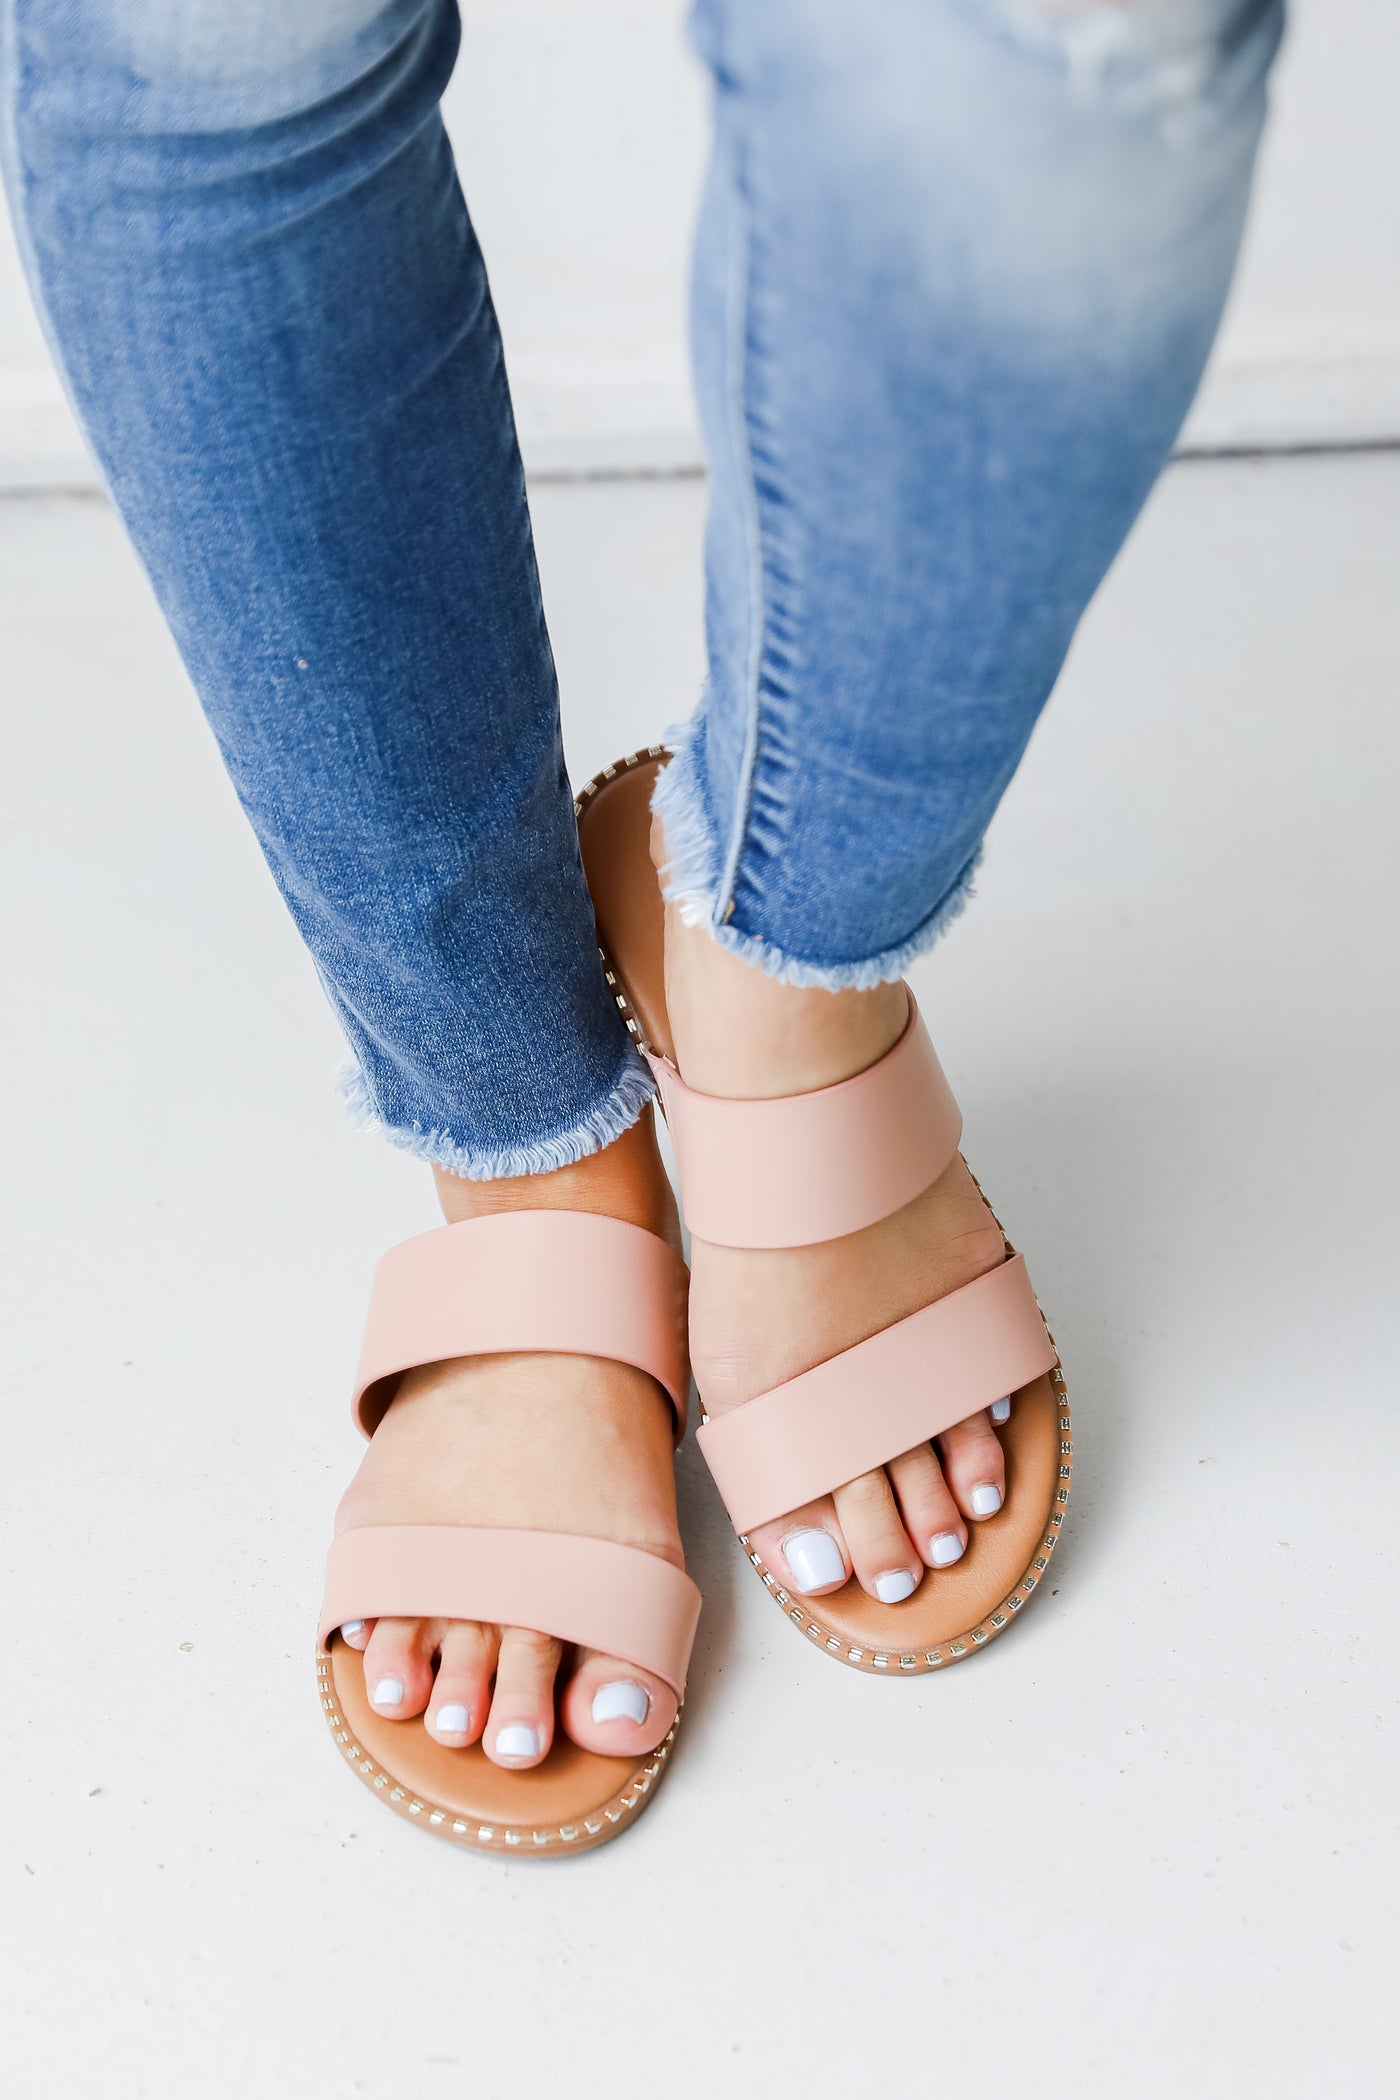 Double Strap Sandals in nude front view